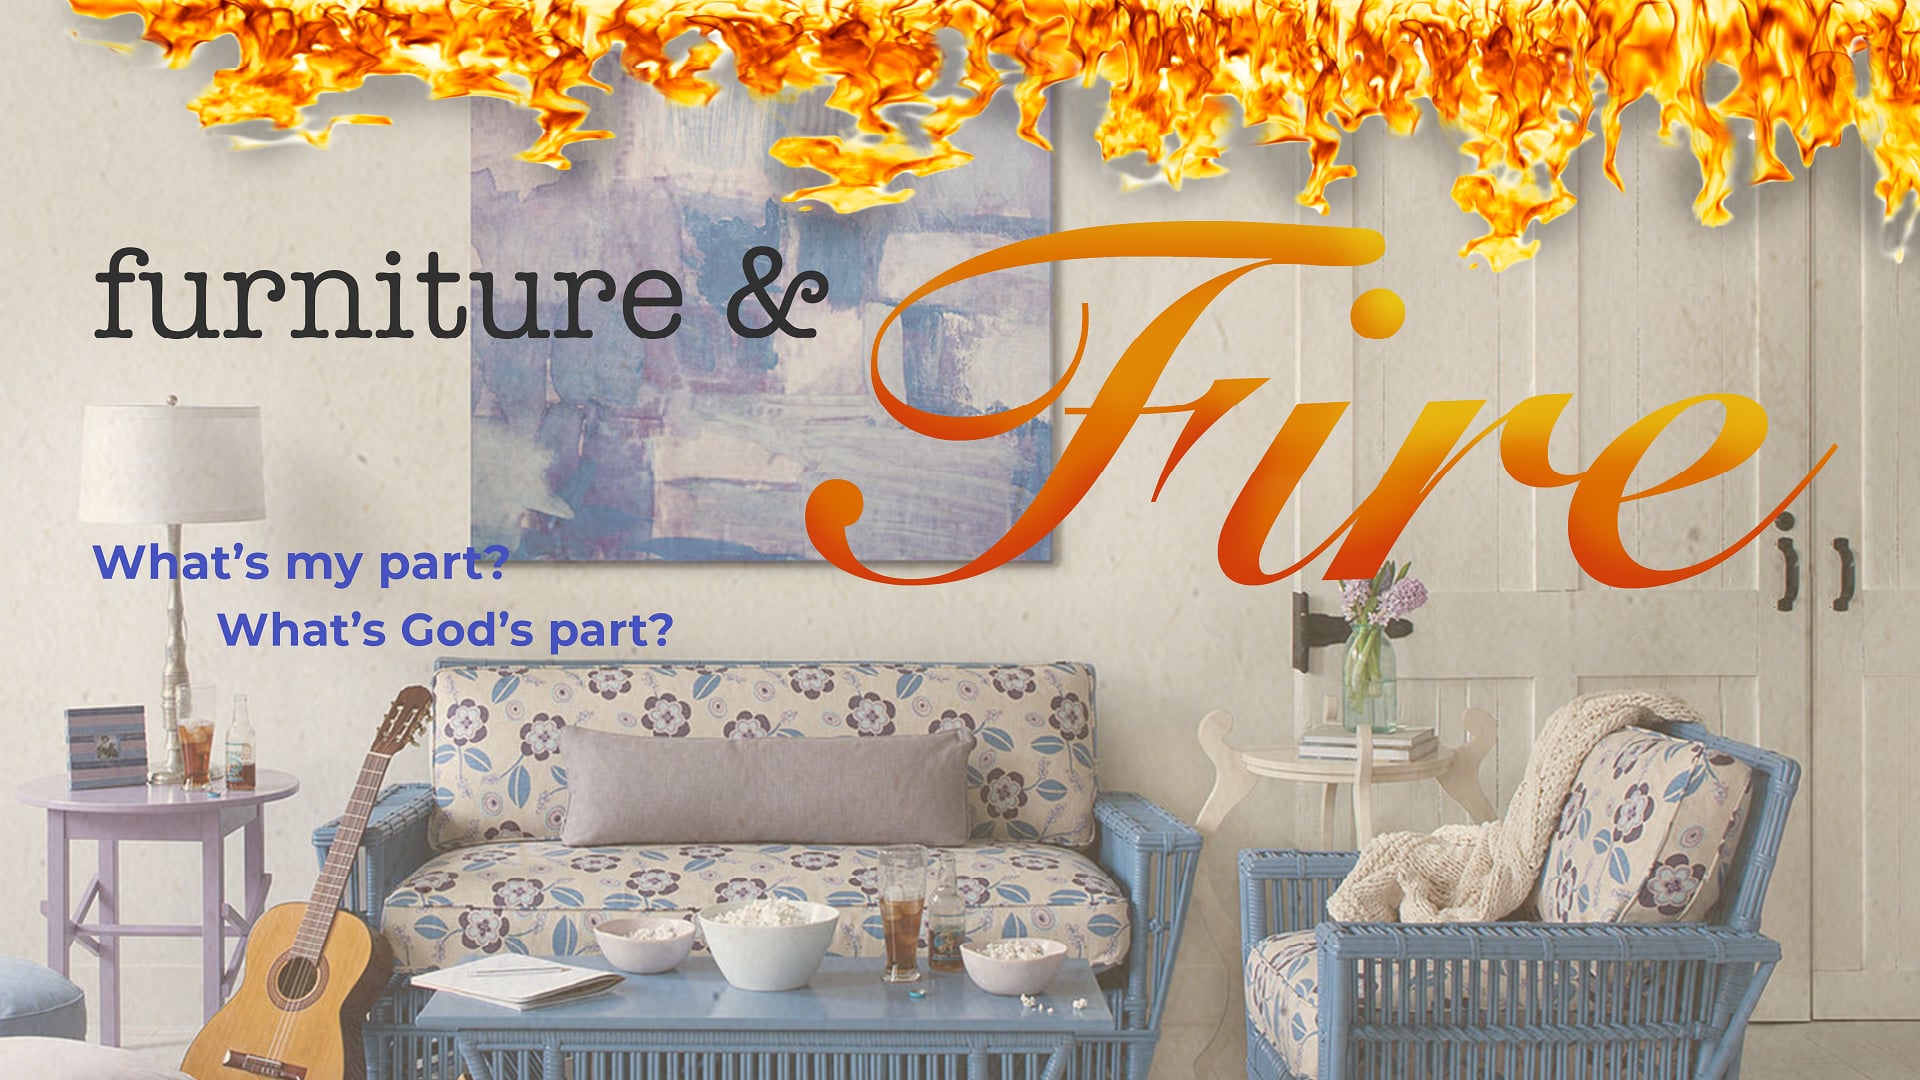 Furniture and Fire - Part 4